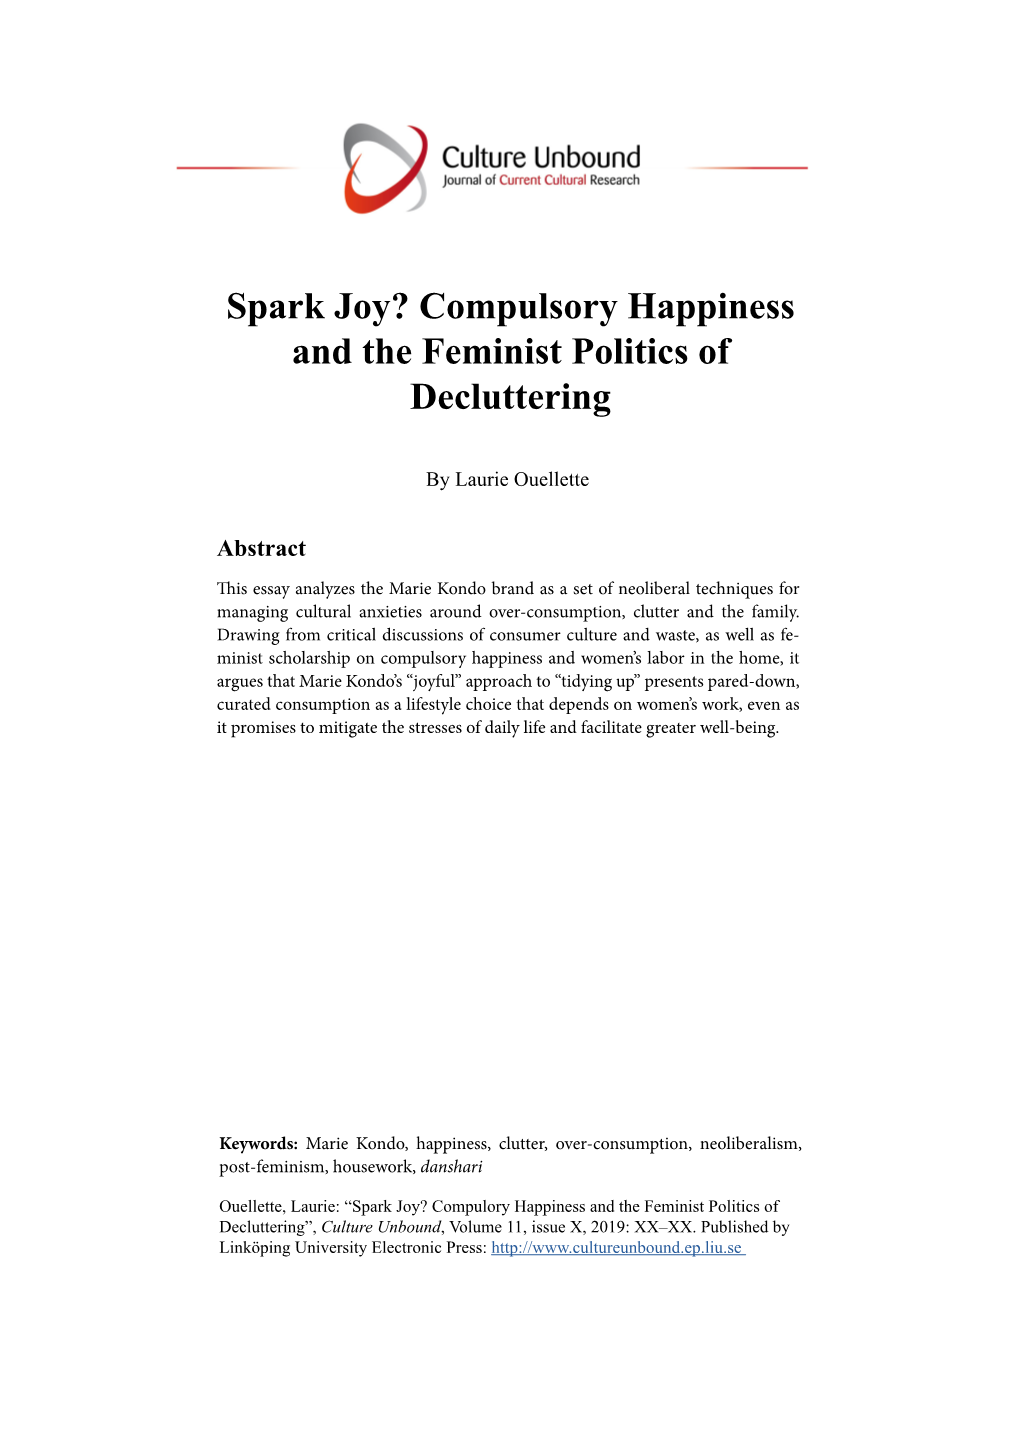 Spark Joy? Compulsory Happiness and the Feminist Politics of Decluttering